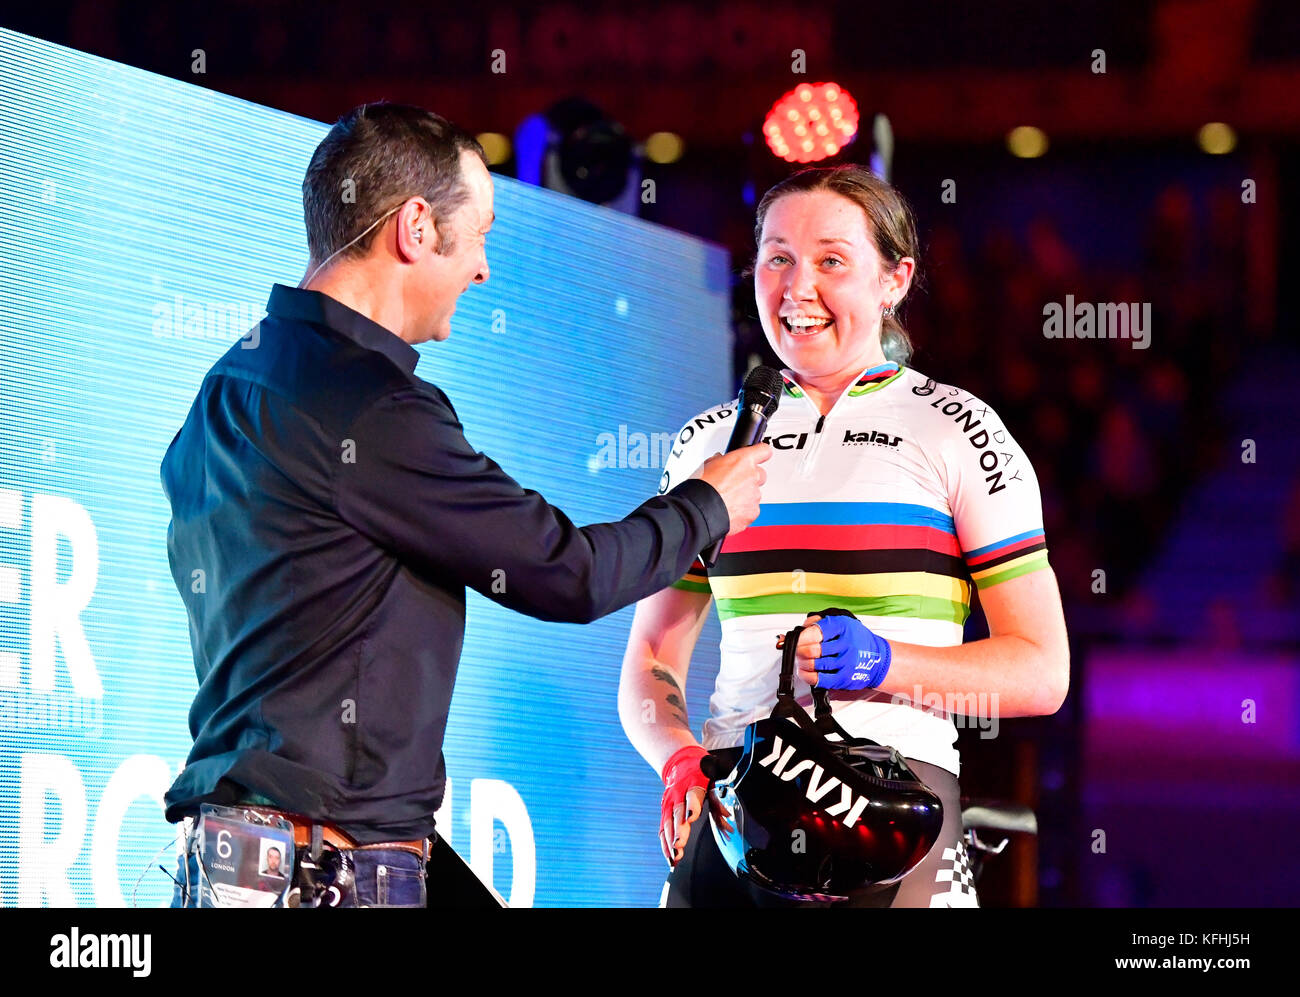 London, UK. 28th Oct, 2017. Rebecca Raybould (GBR) at Presentation after winning Women's Elimination Race (UCI Omnium) during Six Day London - day 5 event on Saturday, 28 October 2017, London England. Credit: Taka Wu/Alamy Live News Stock Photo